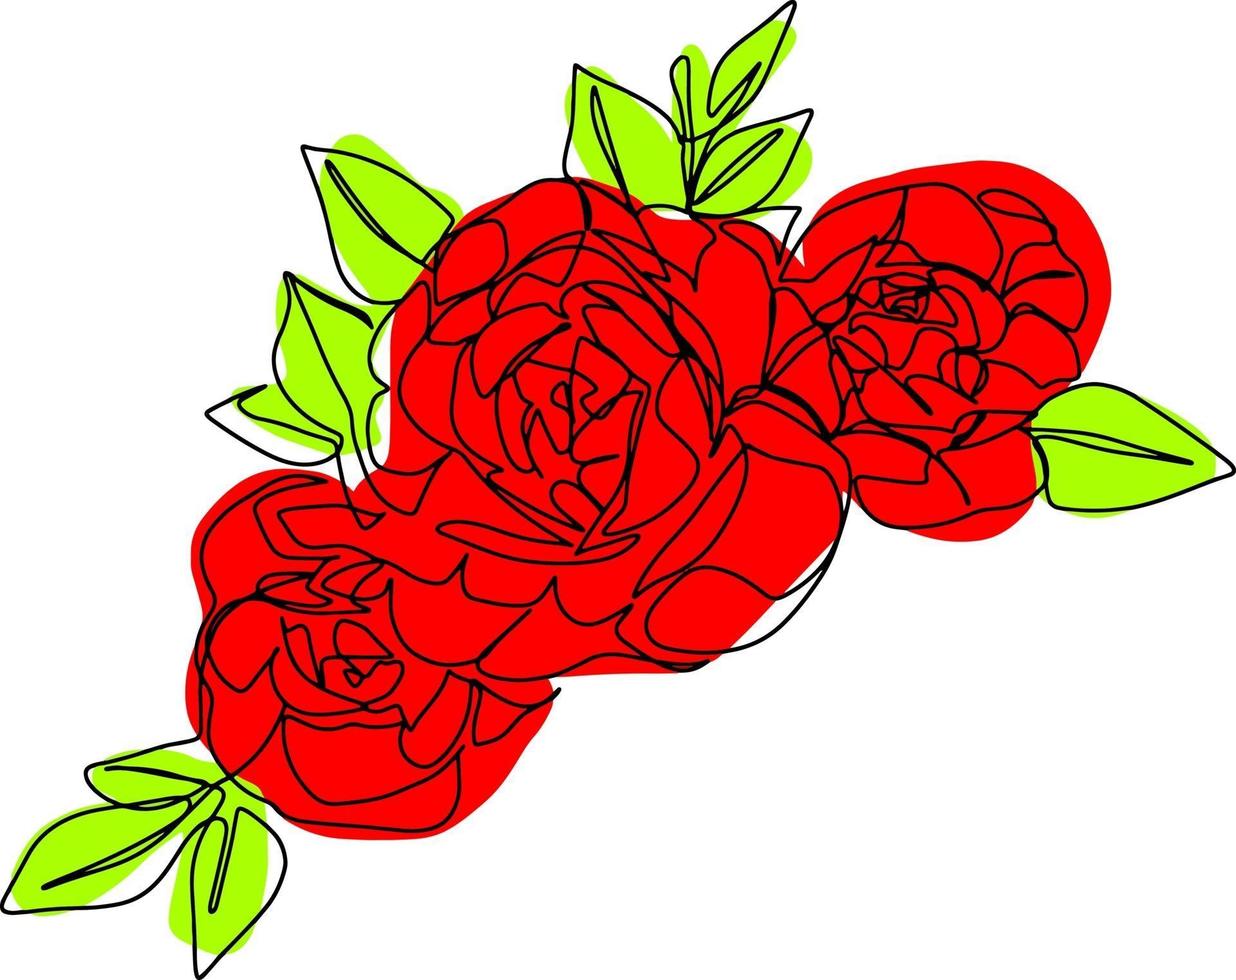 roses 3 buds with leaves isolated vector hand one line drawing illustration red and green